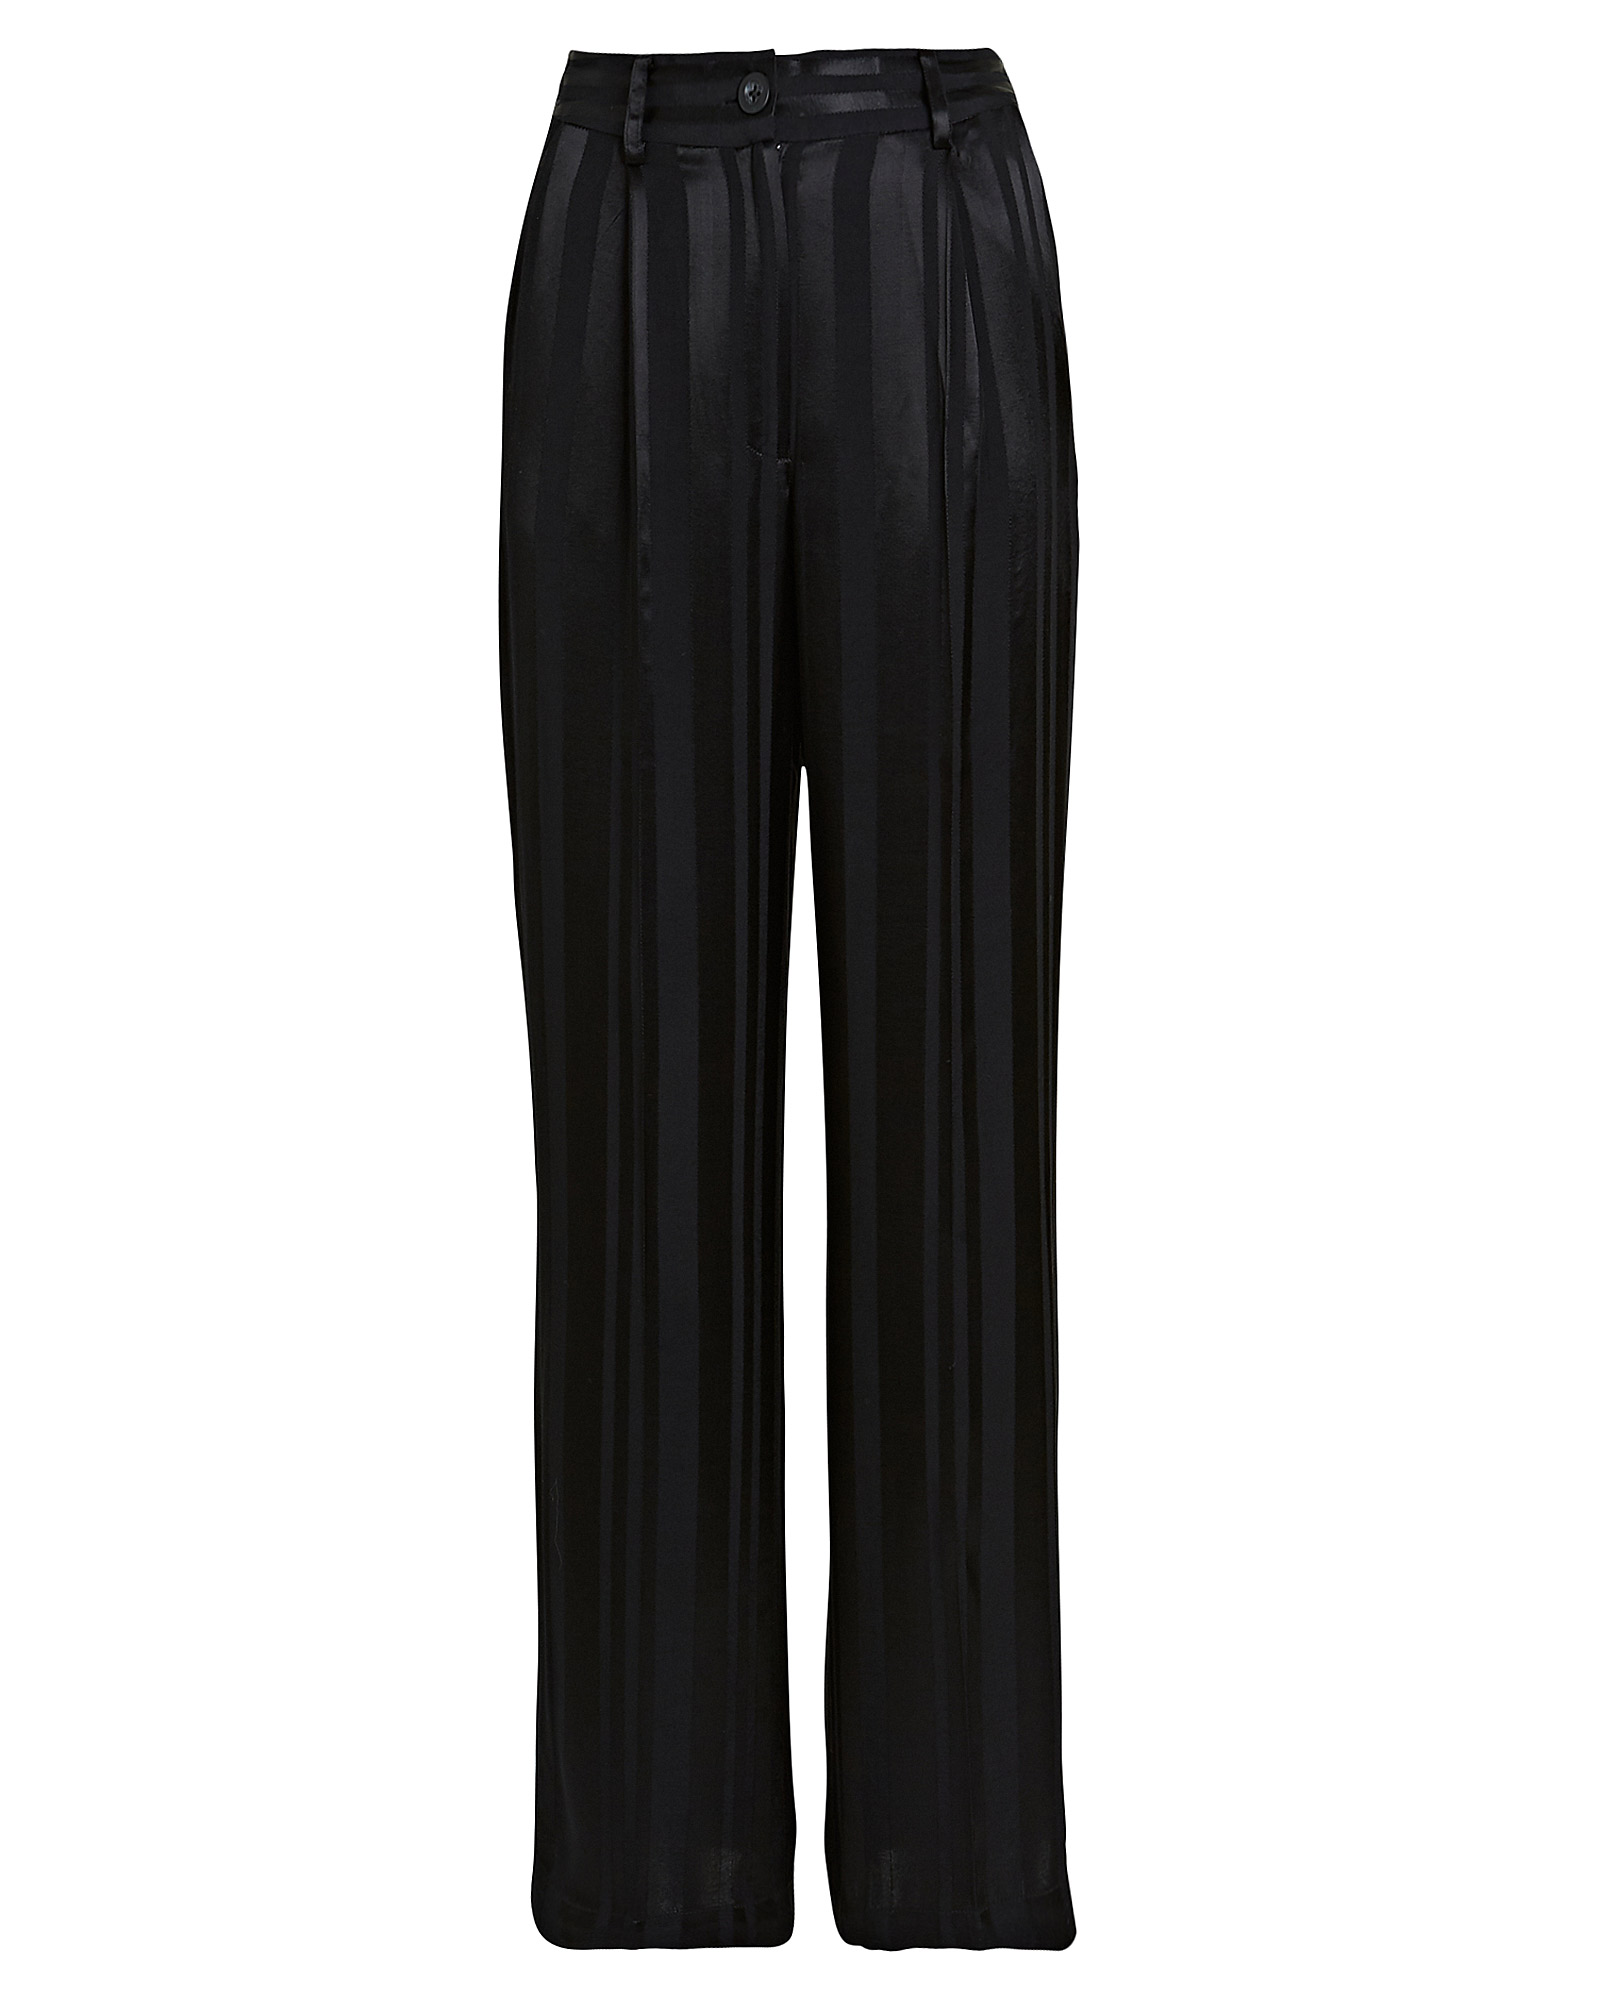 ANINE BING Hayes Striped Trousers,060048455057